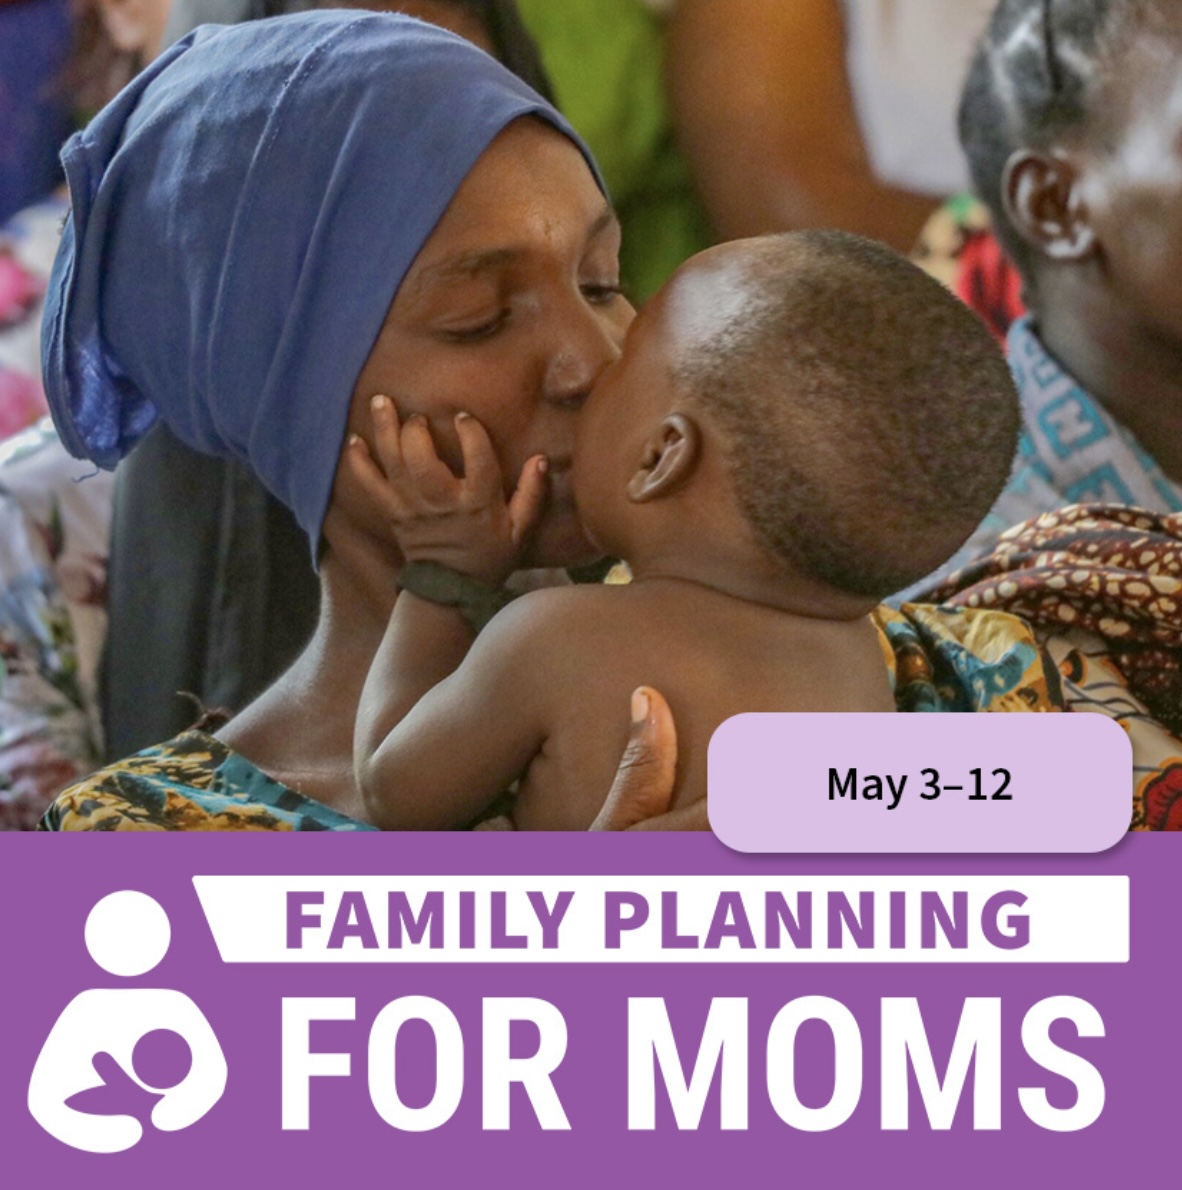 🎉 Celebrating #FP4Moms with @USAID_MOMENTUM ! Empowering mothers worldwide, featuring stories like Zoulaha Adamou’s, a health worker in Niger, promoting family health. Discover more stories and learn about integrating family planning into health programs. usaidmomentum.org/fp4moms/